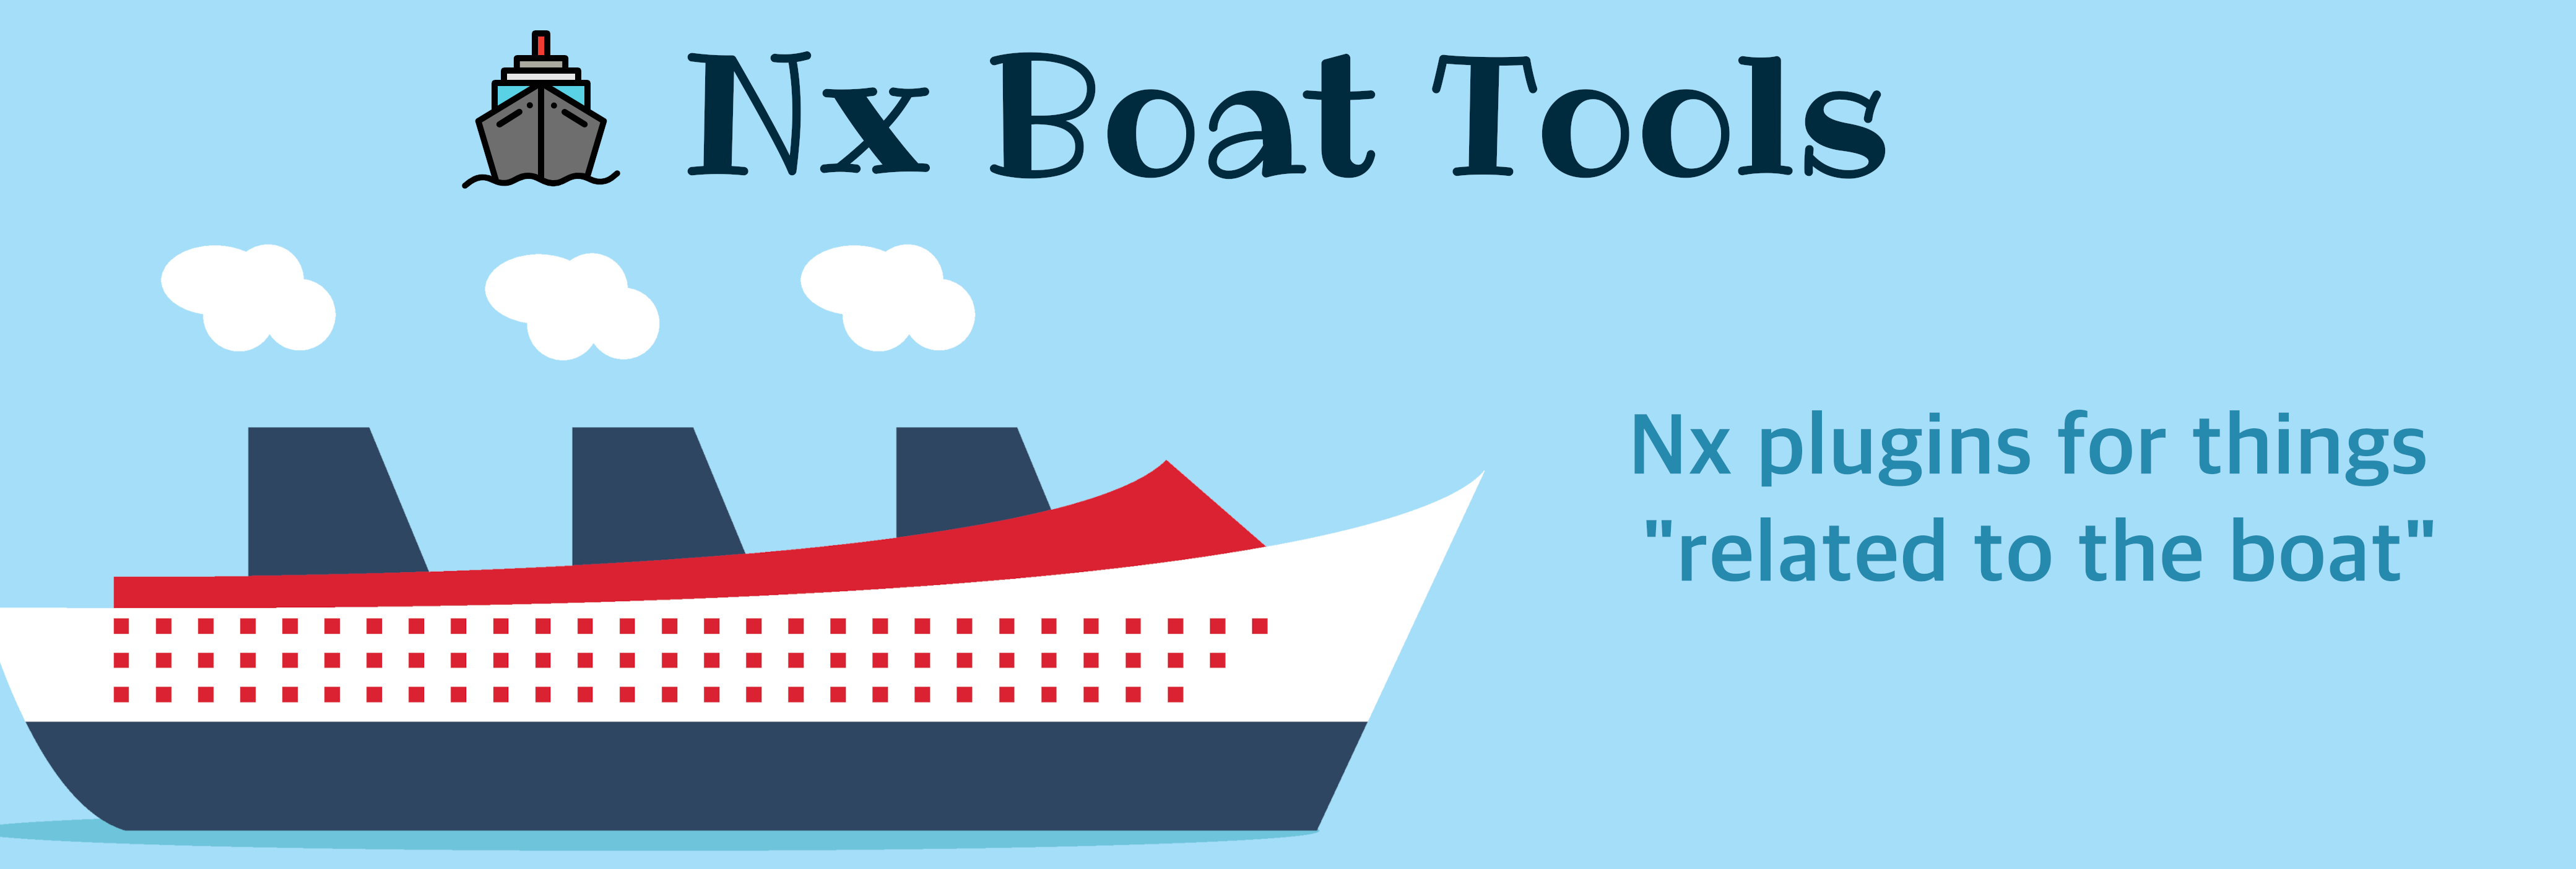 GitHub - nx-boat-tools/nx-boat-tools: Nx tools for things related to the  boat--the net (.Net), dock (Docker), and helm (Helm)